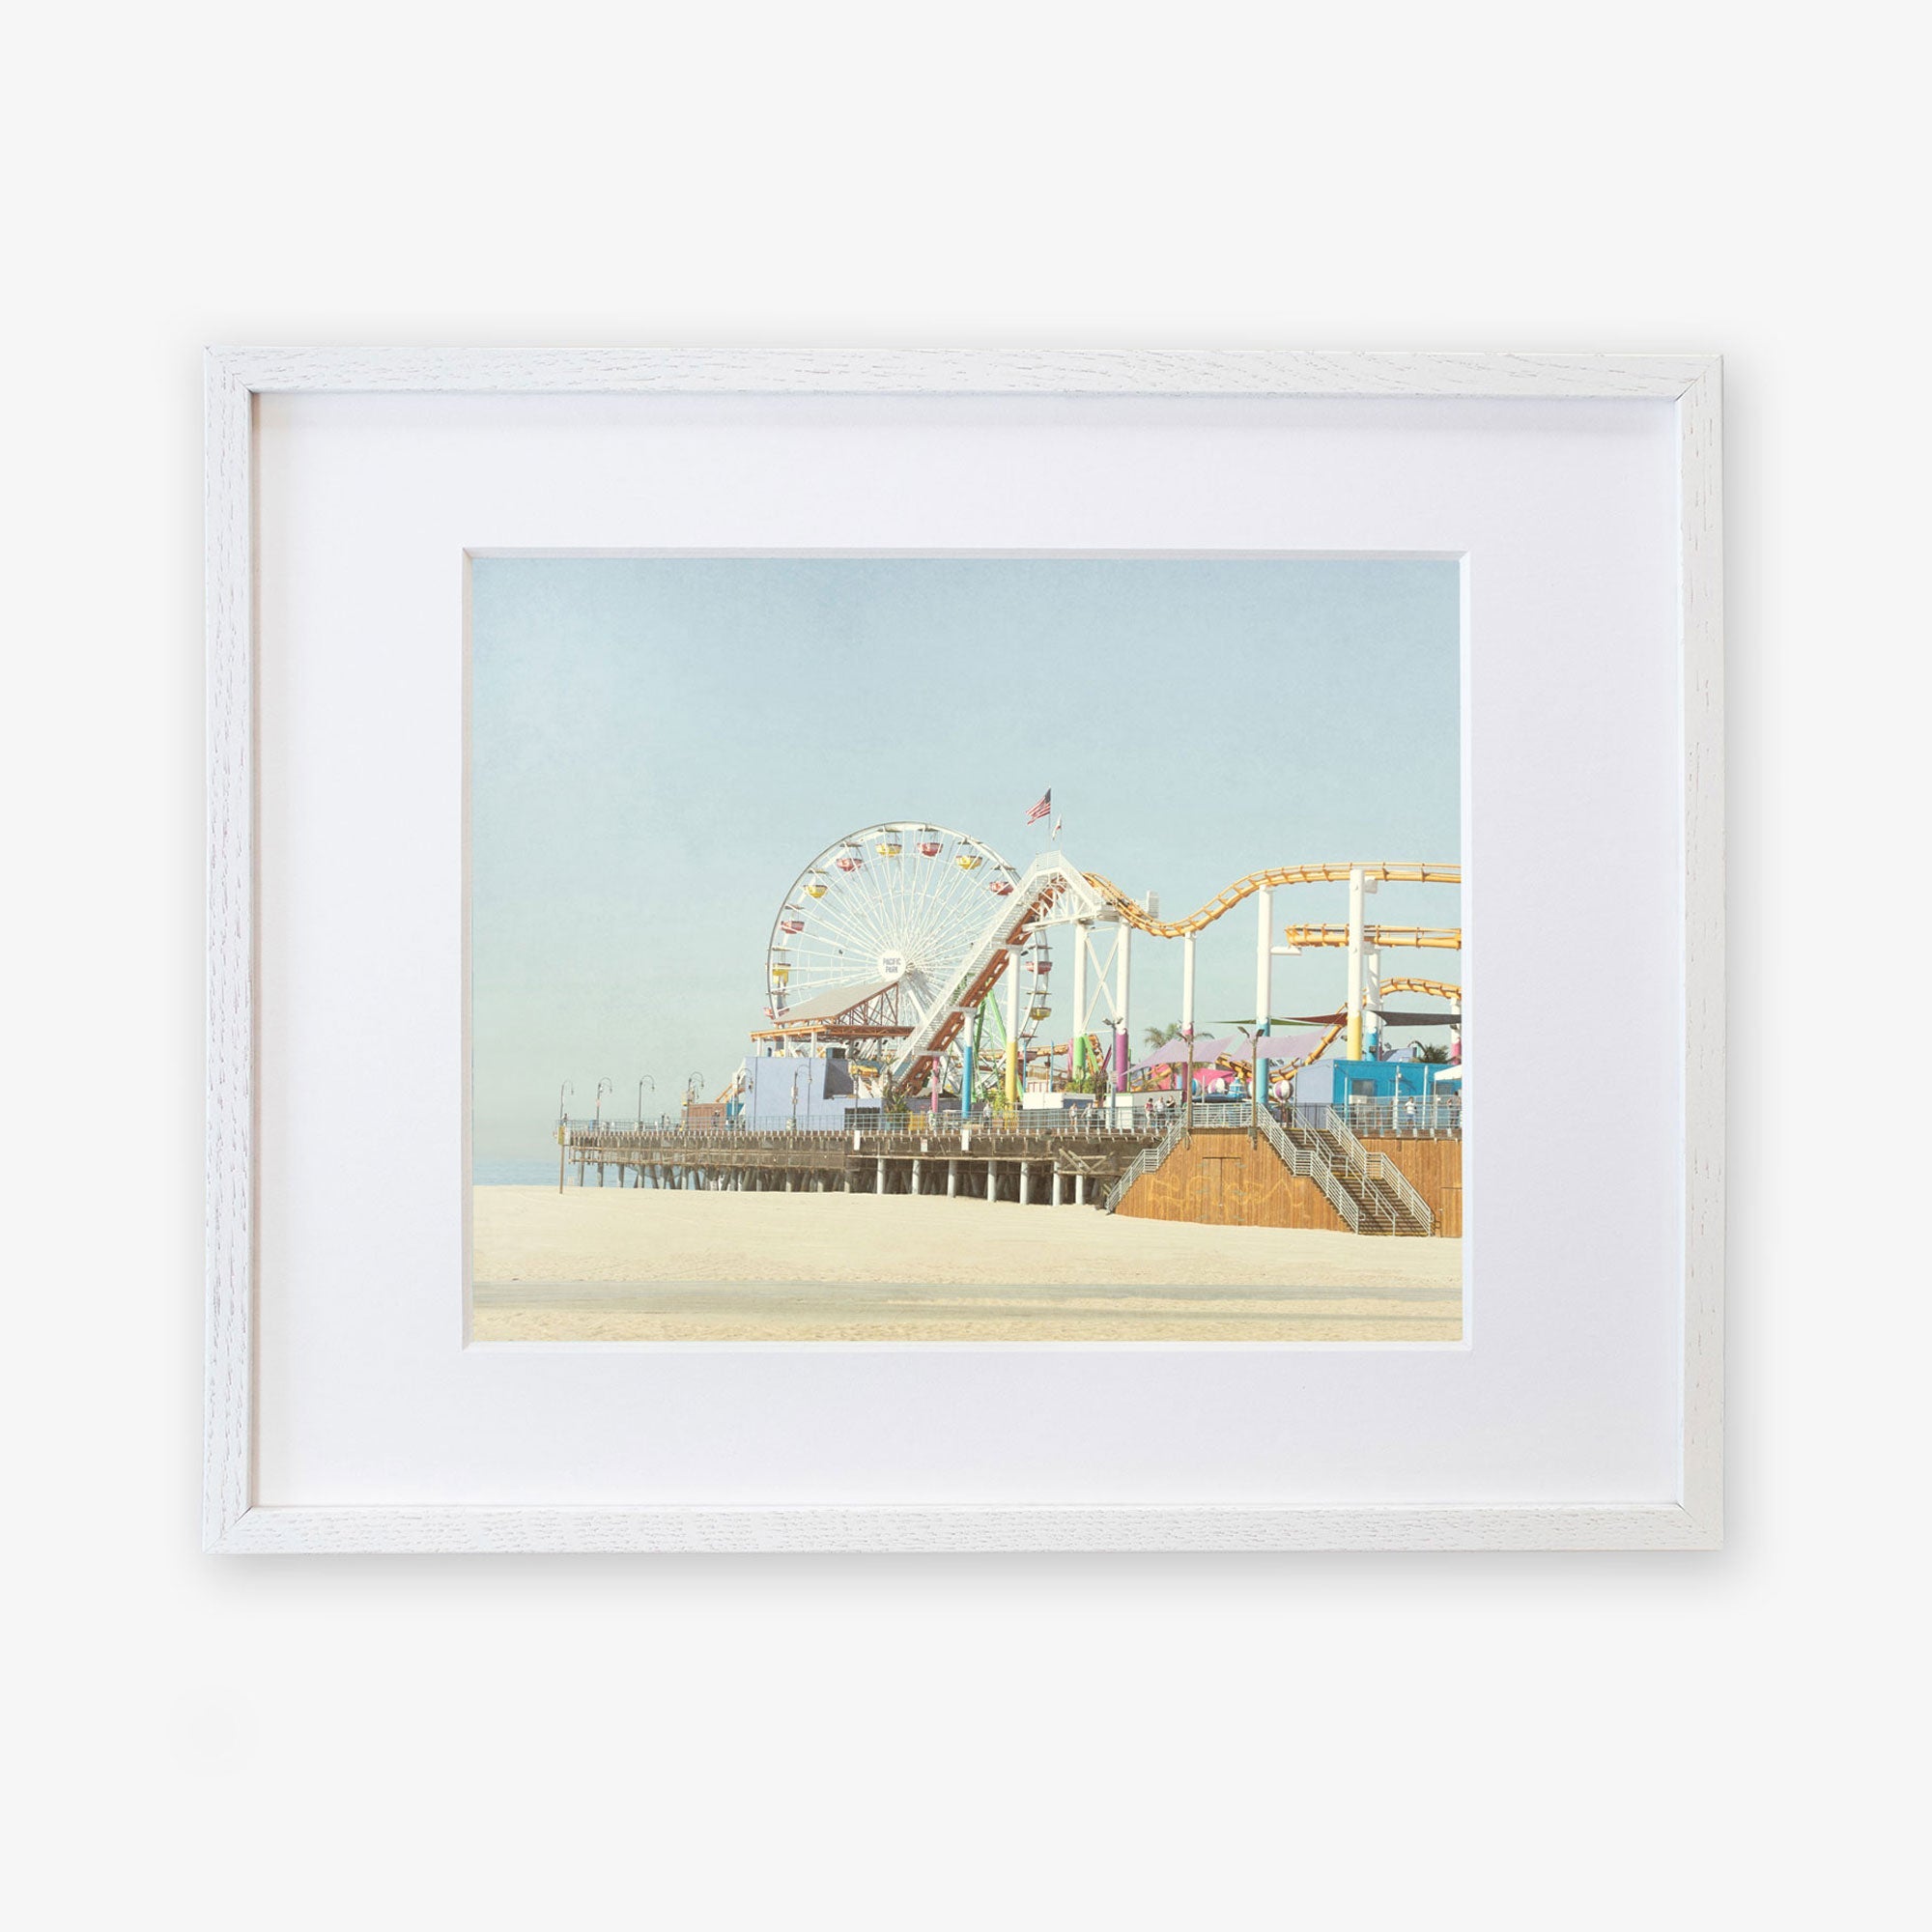 A framed illustration of Santa Monica Pier, featuring a ferris wheel and roller coaster, displayed against a calm blue sky. Get your Offley Green California Print, &#39;Santa Monica Pier&#39; today!